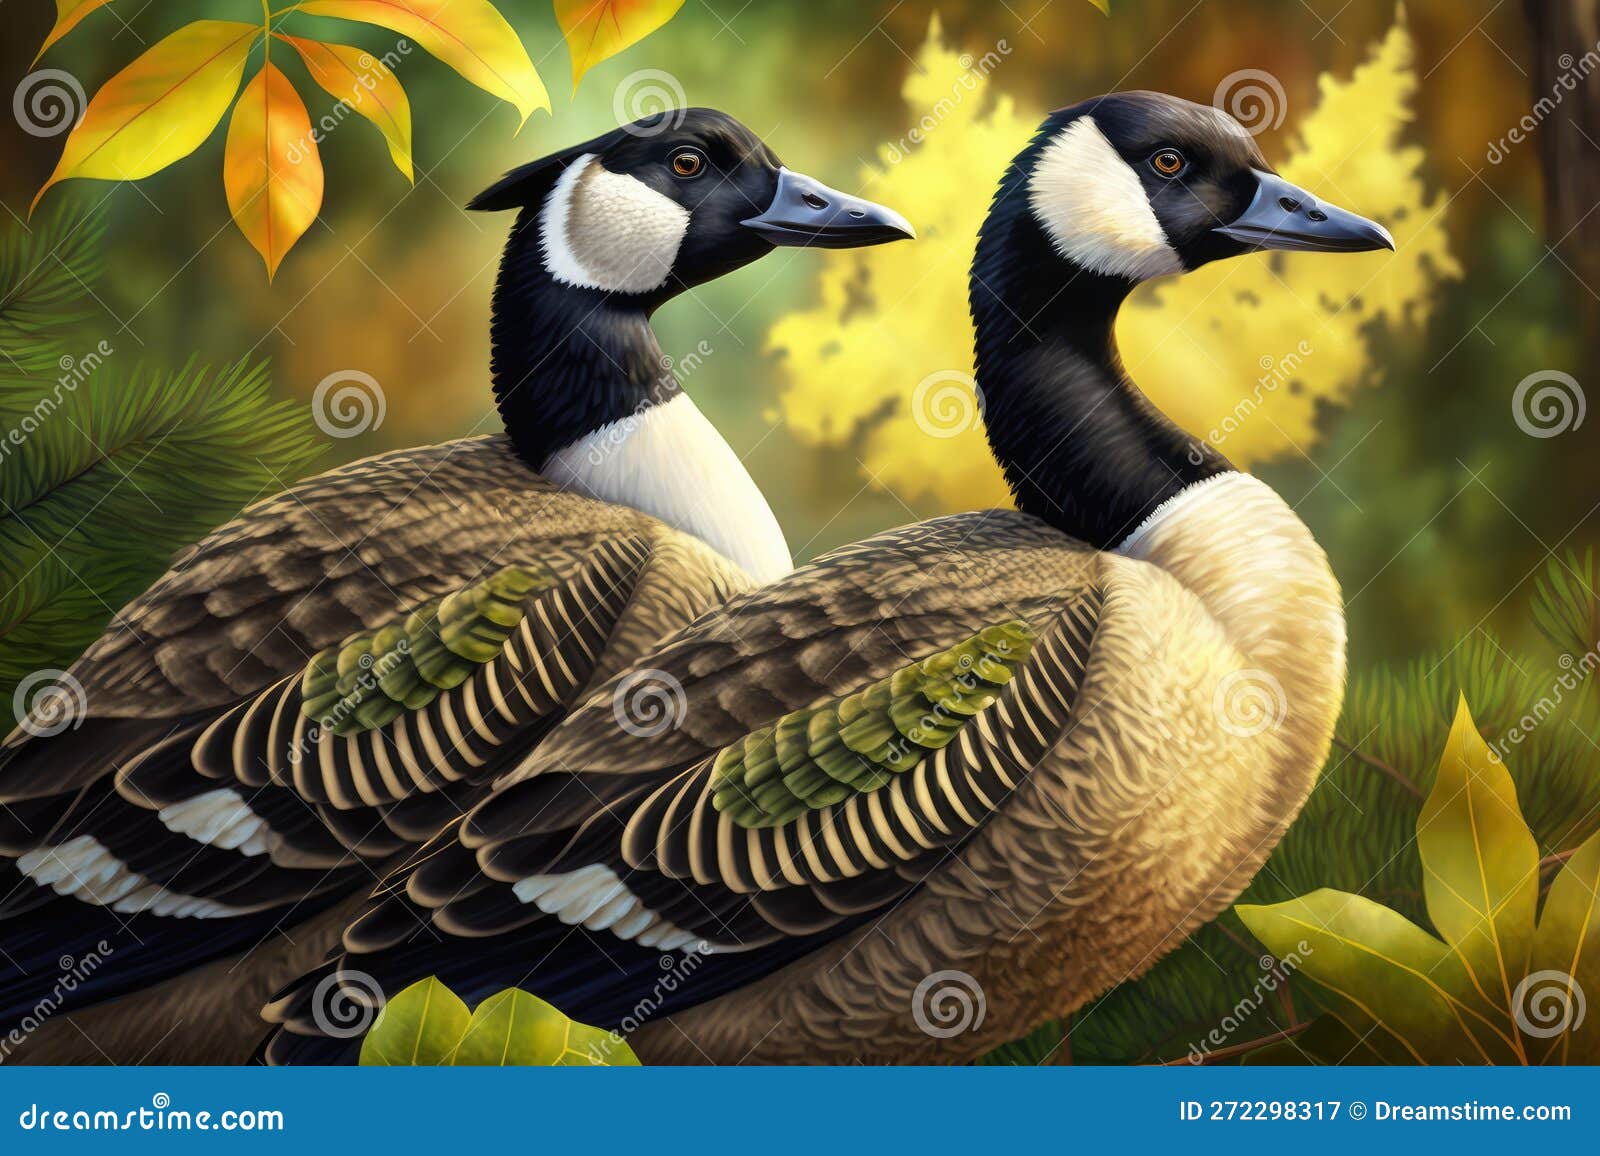 Design of Two Colorful Canada Goose Bird in the Jungle. Stock